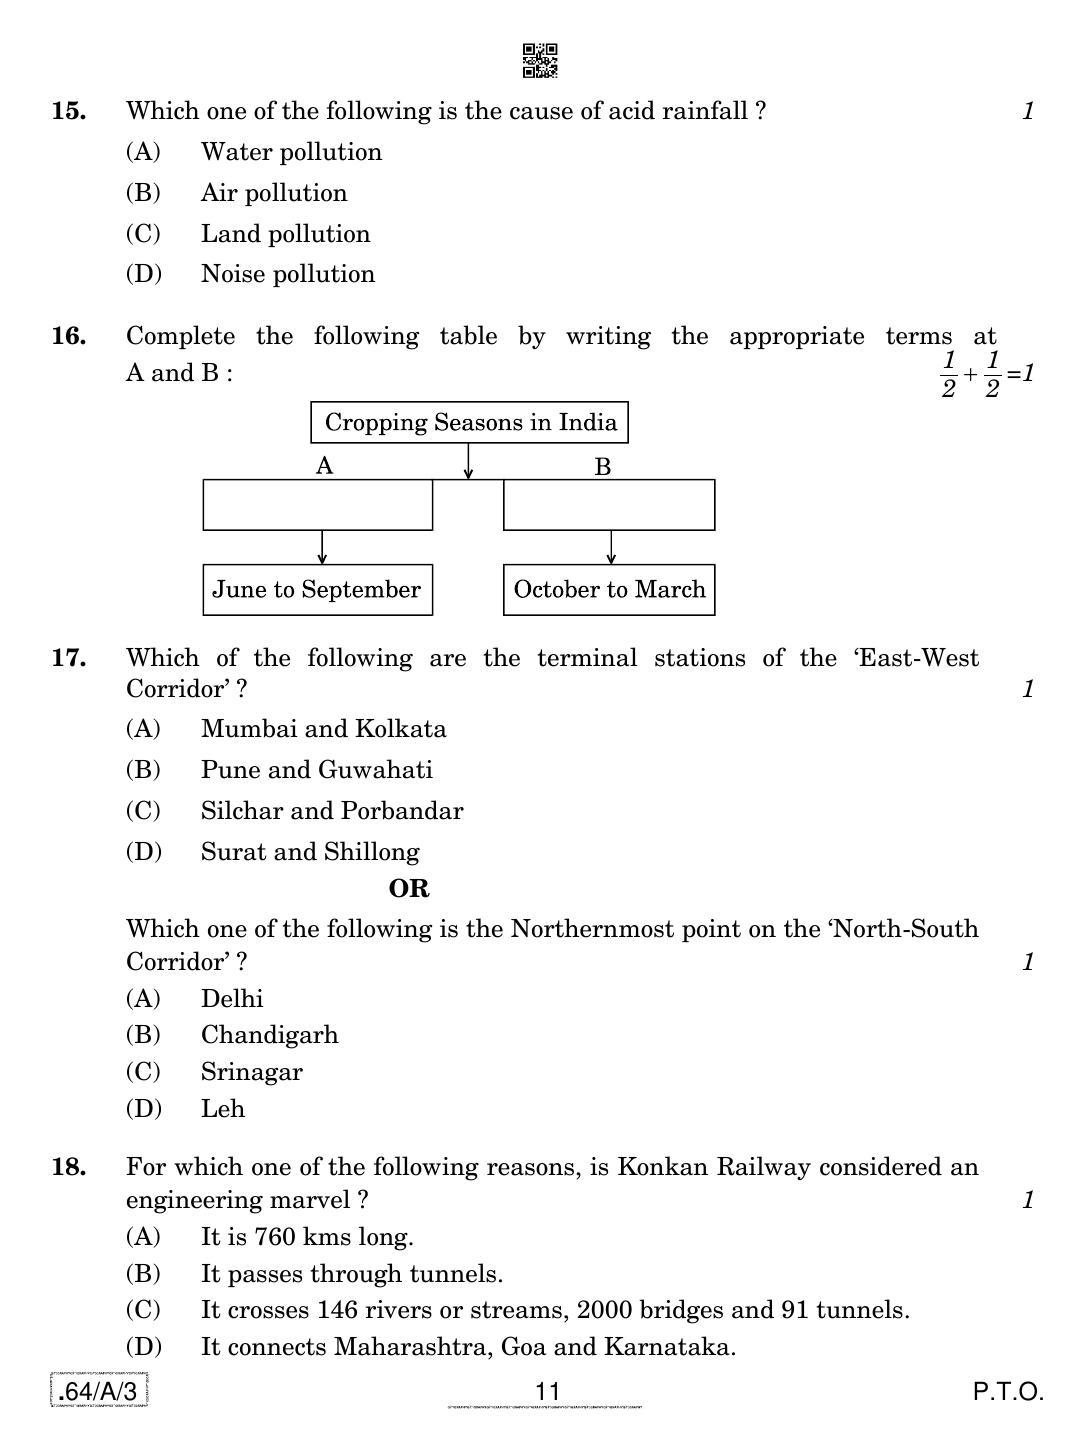 CBSE Class 12 64-C-3 - Geography 2020 Compartment Question Paper - Page 11